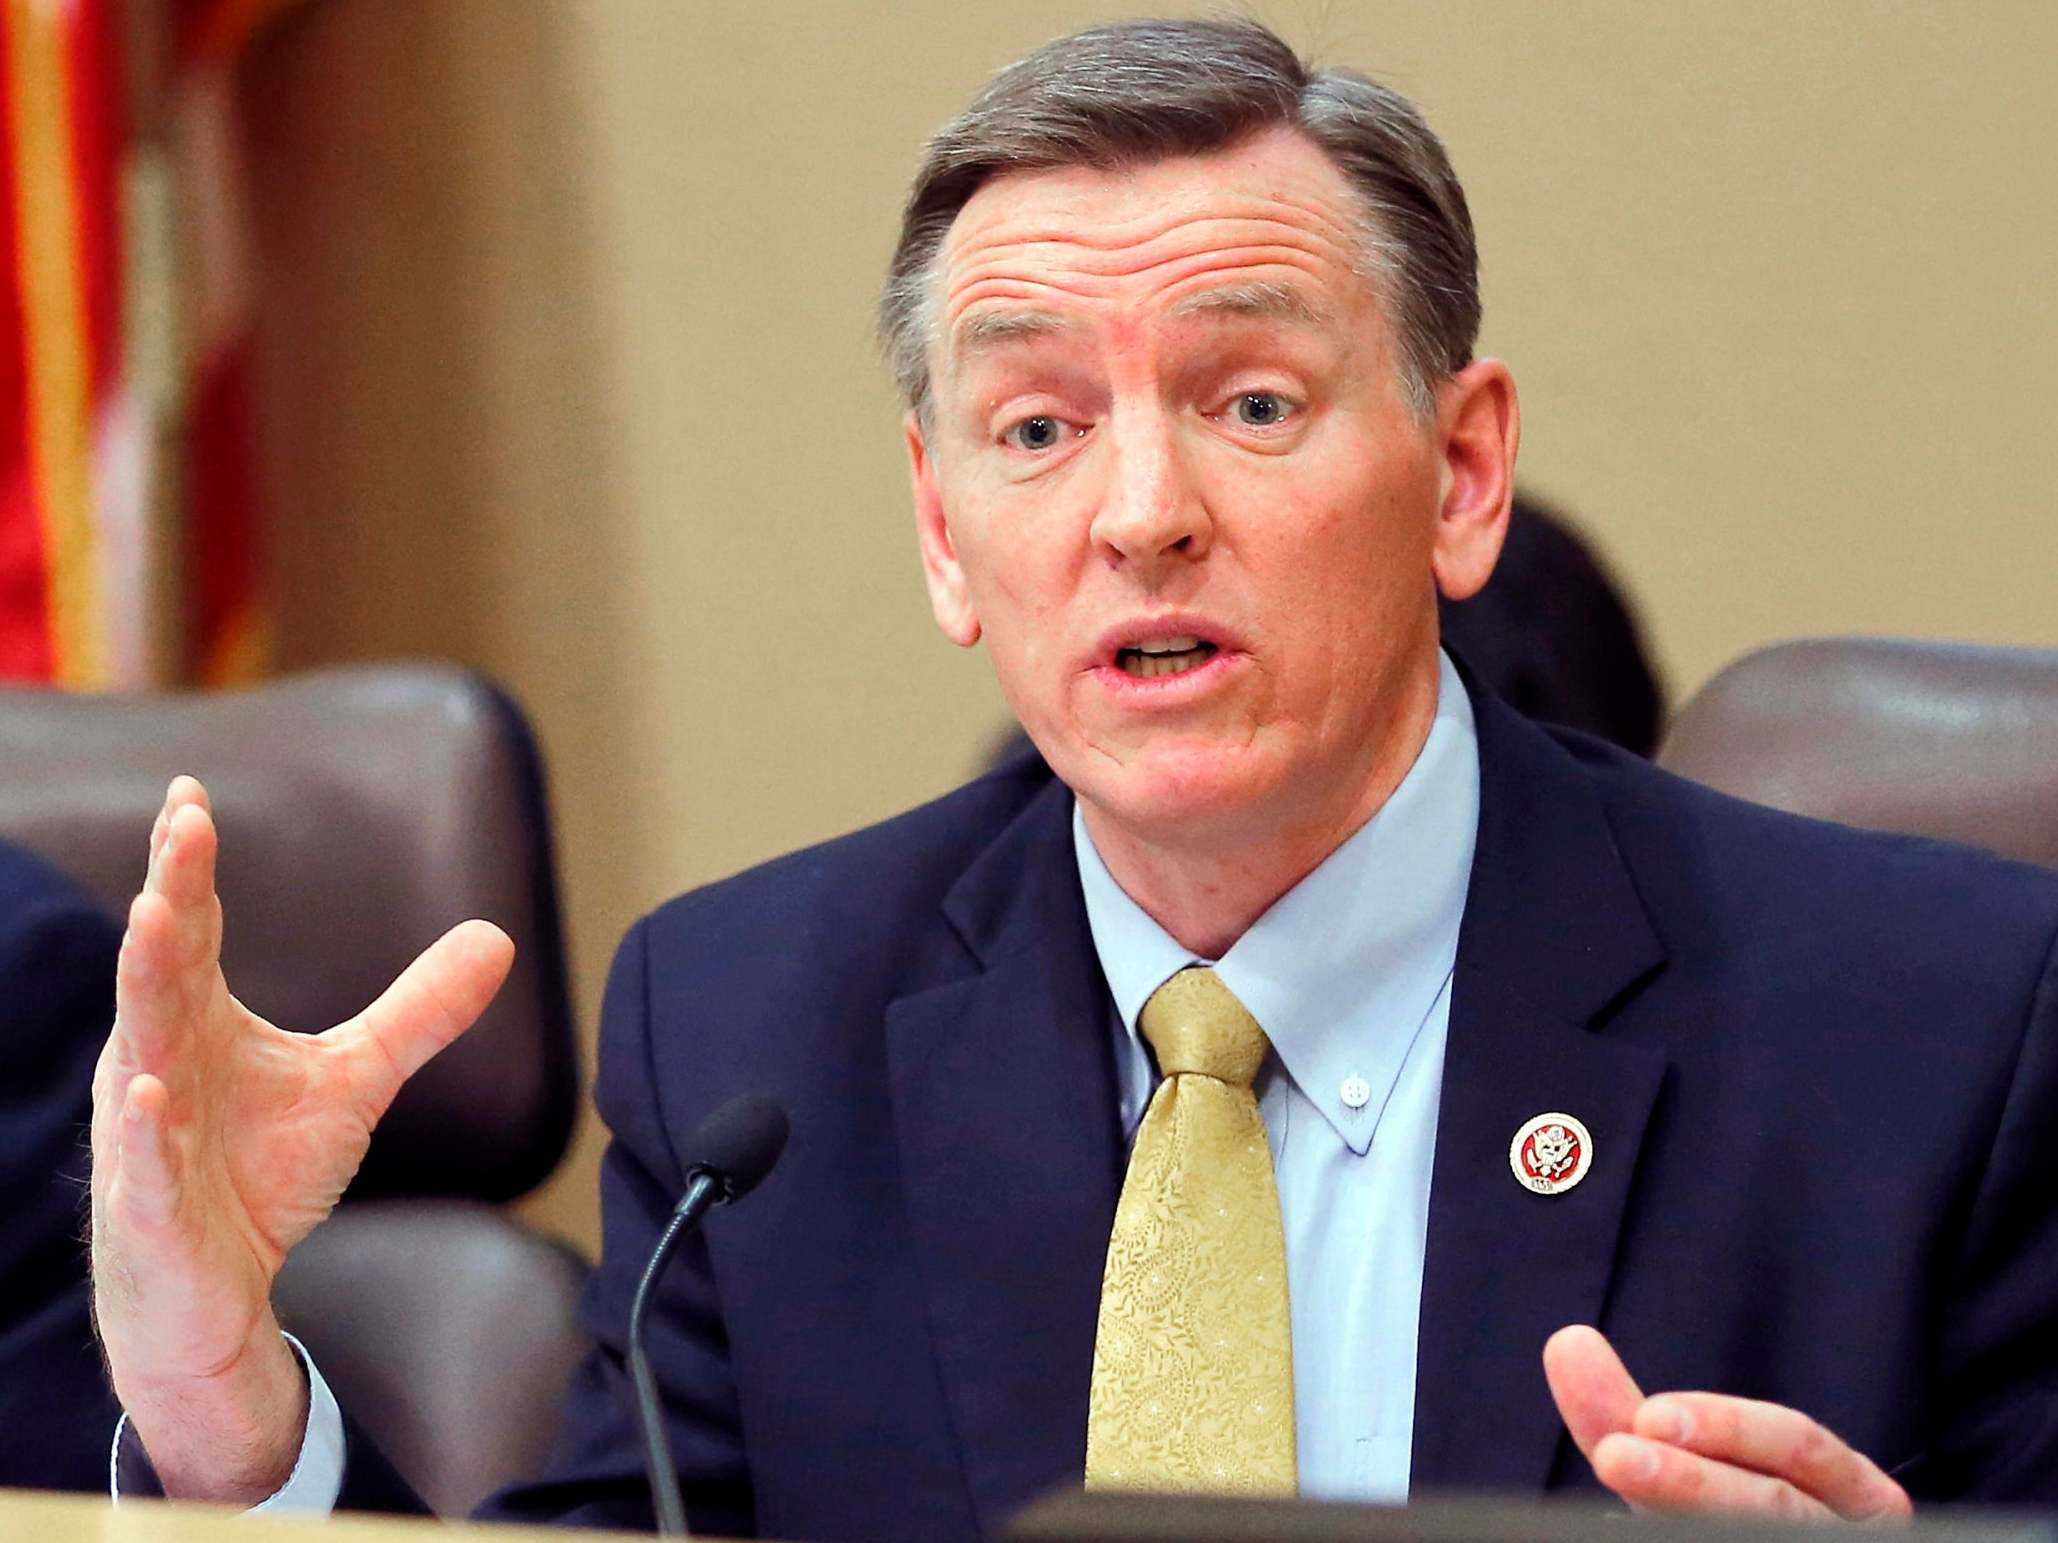 Arizona’s Paul Gosar has spent more on travel than any other House member